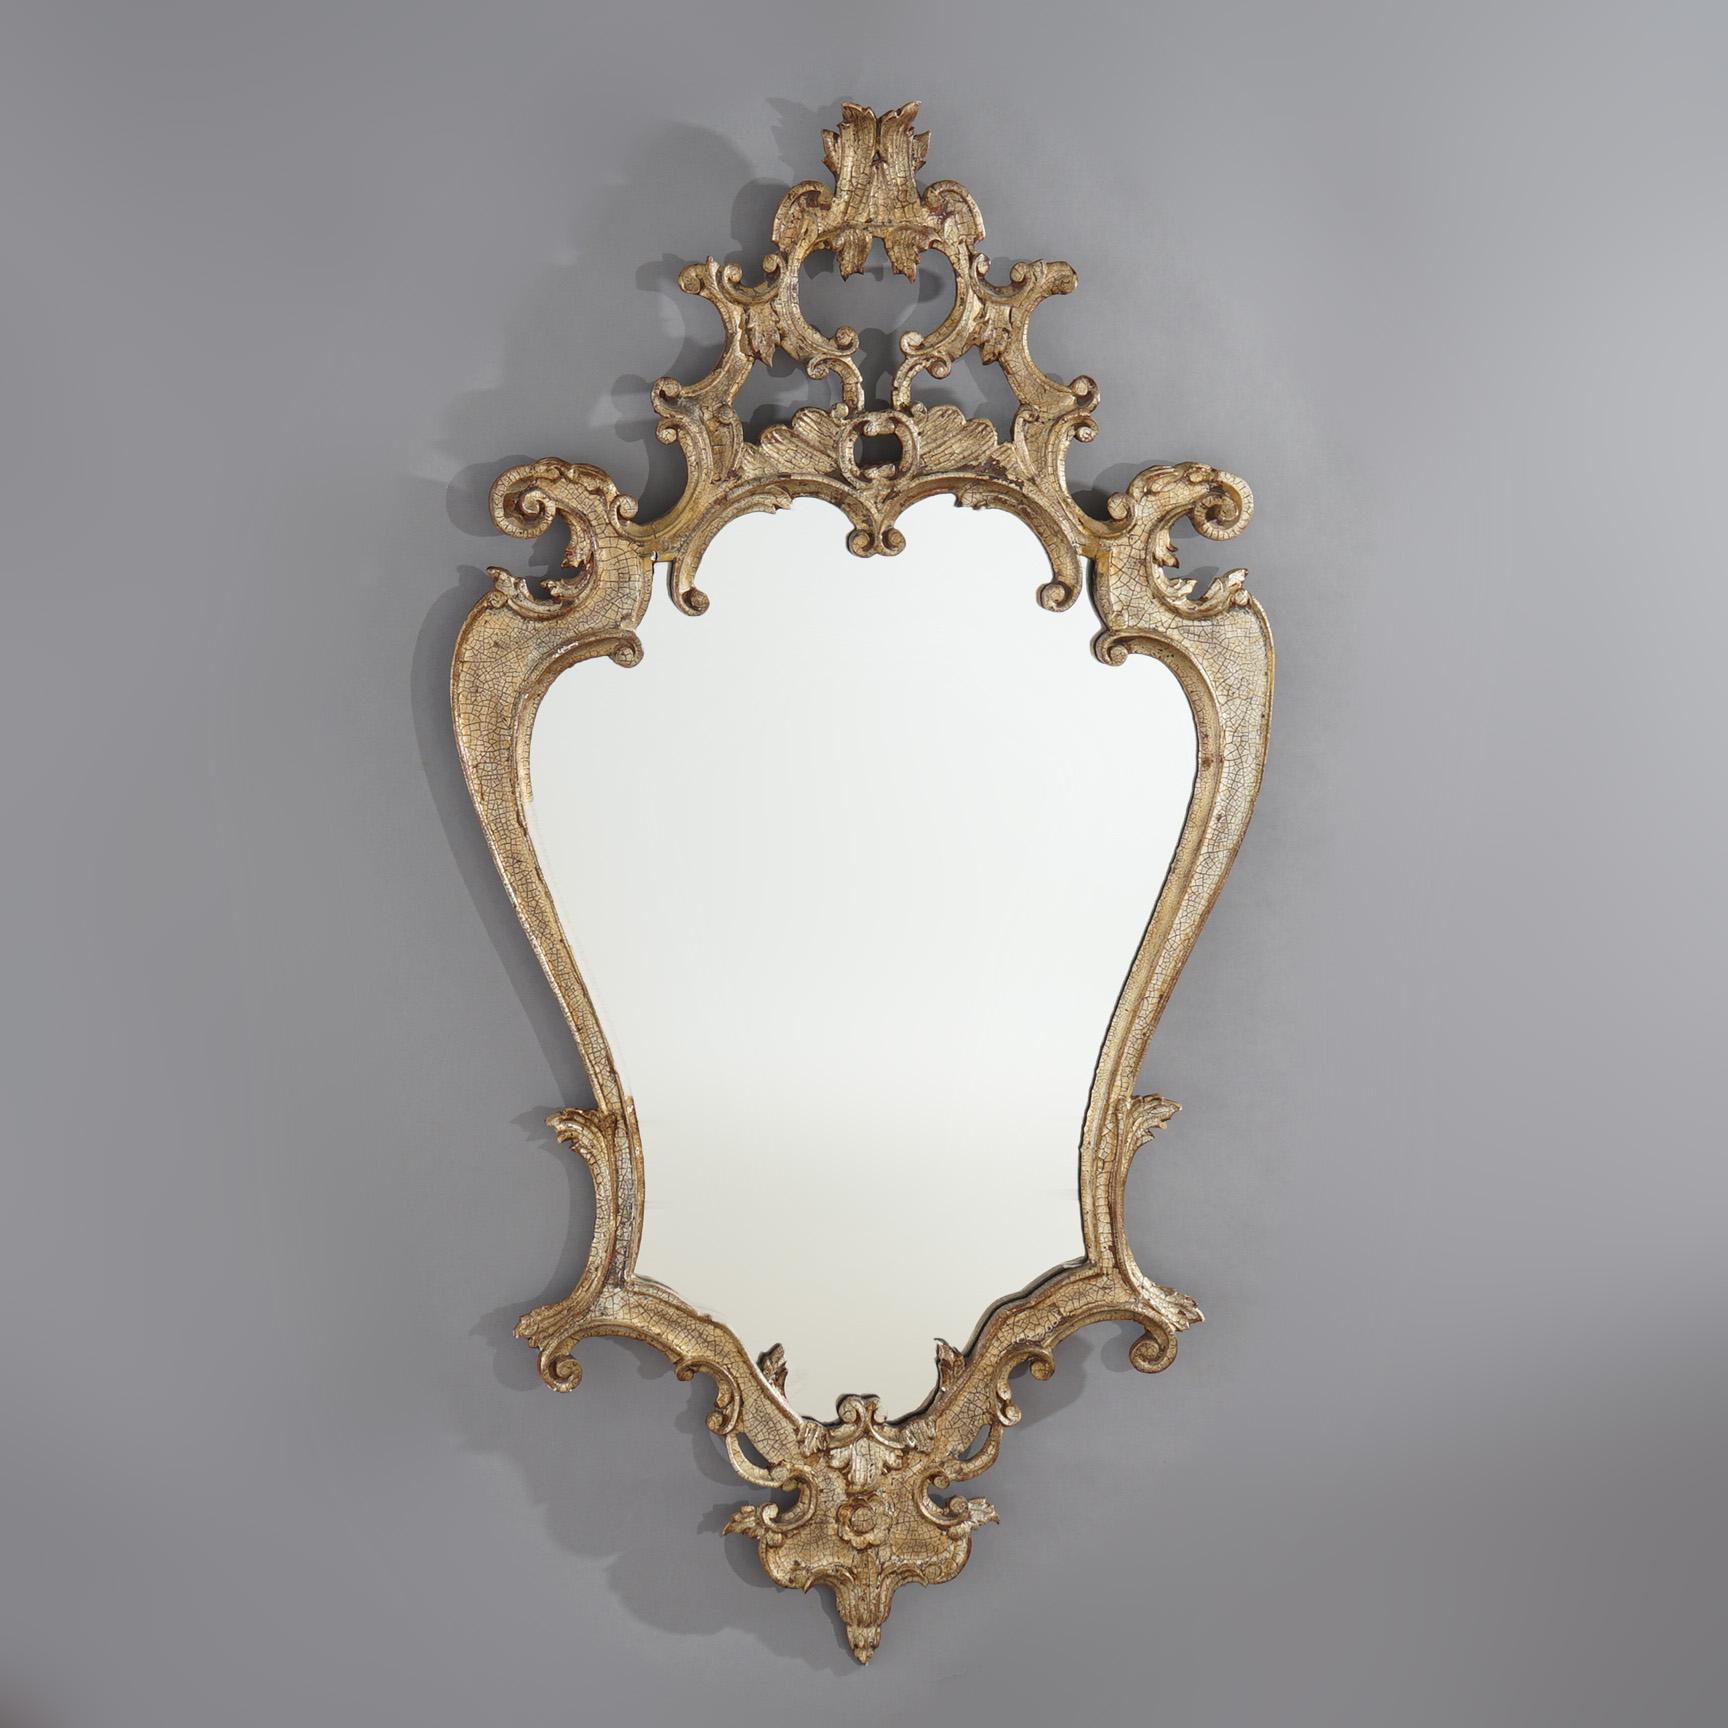 20th Century Antique French Louis XIV Giltwood Scroll & Foliate Form Shaped Wall Mirror C1920